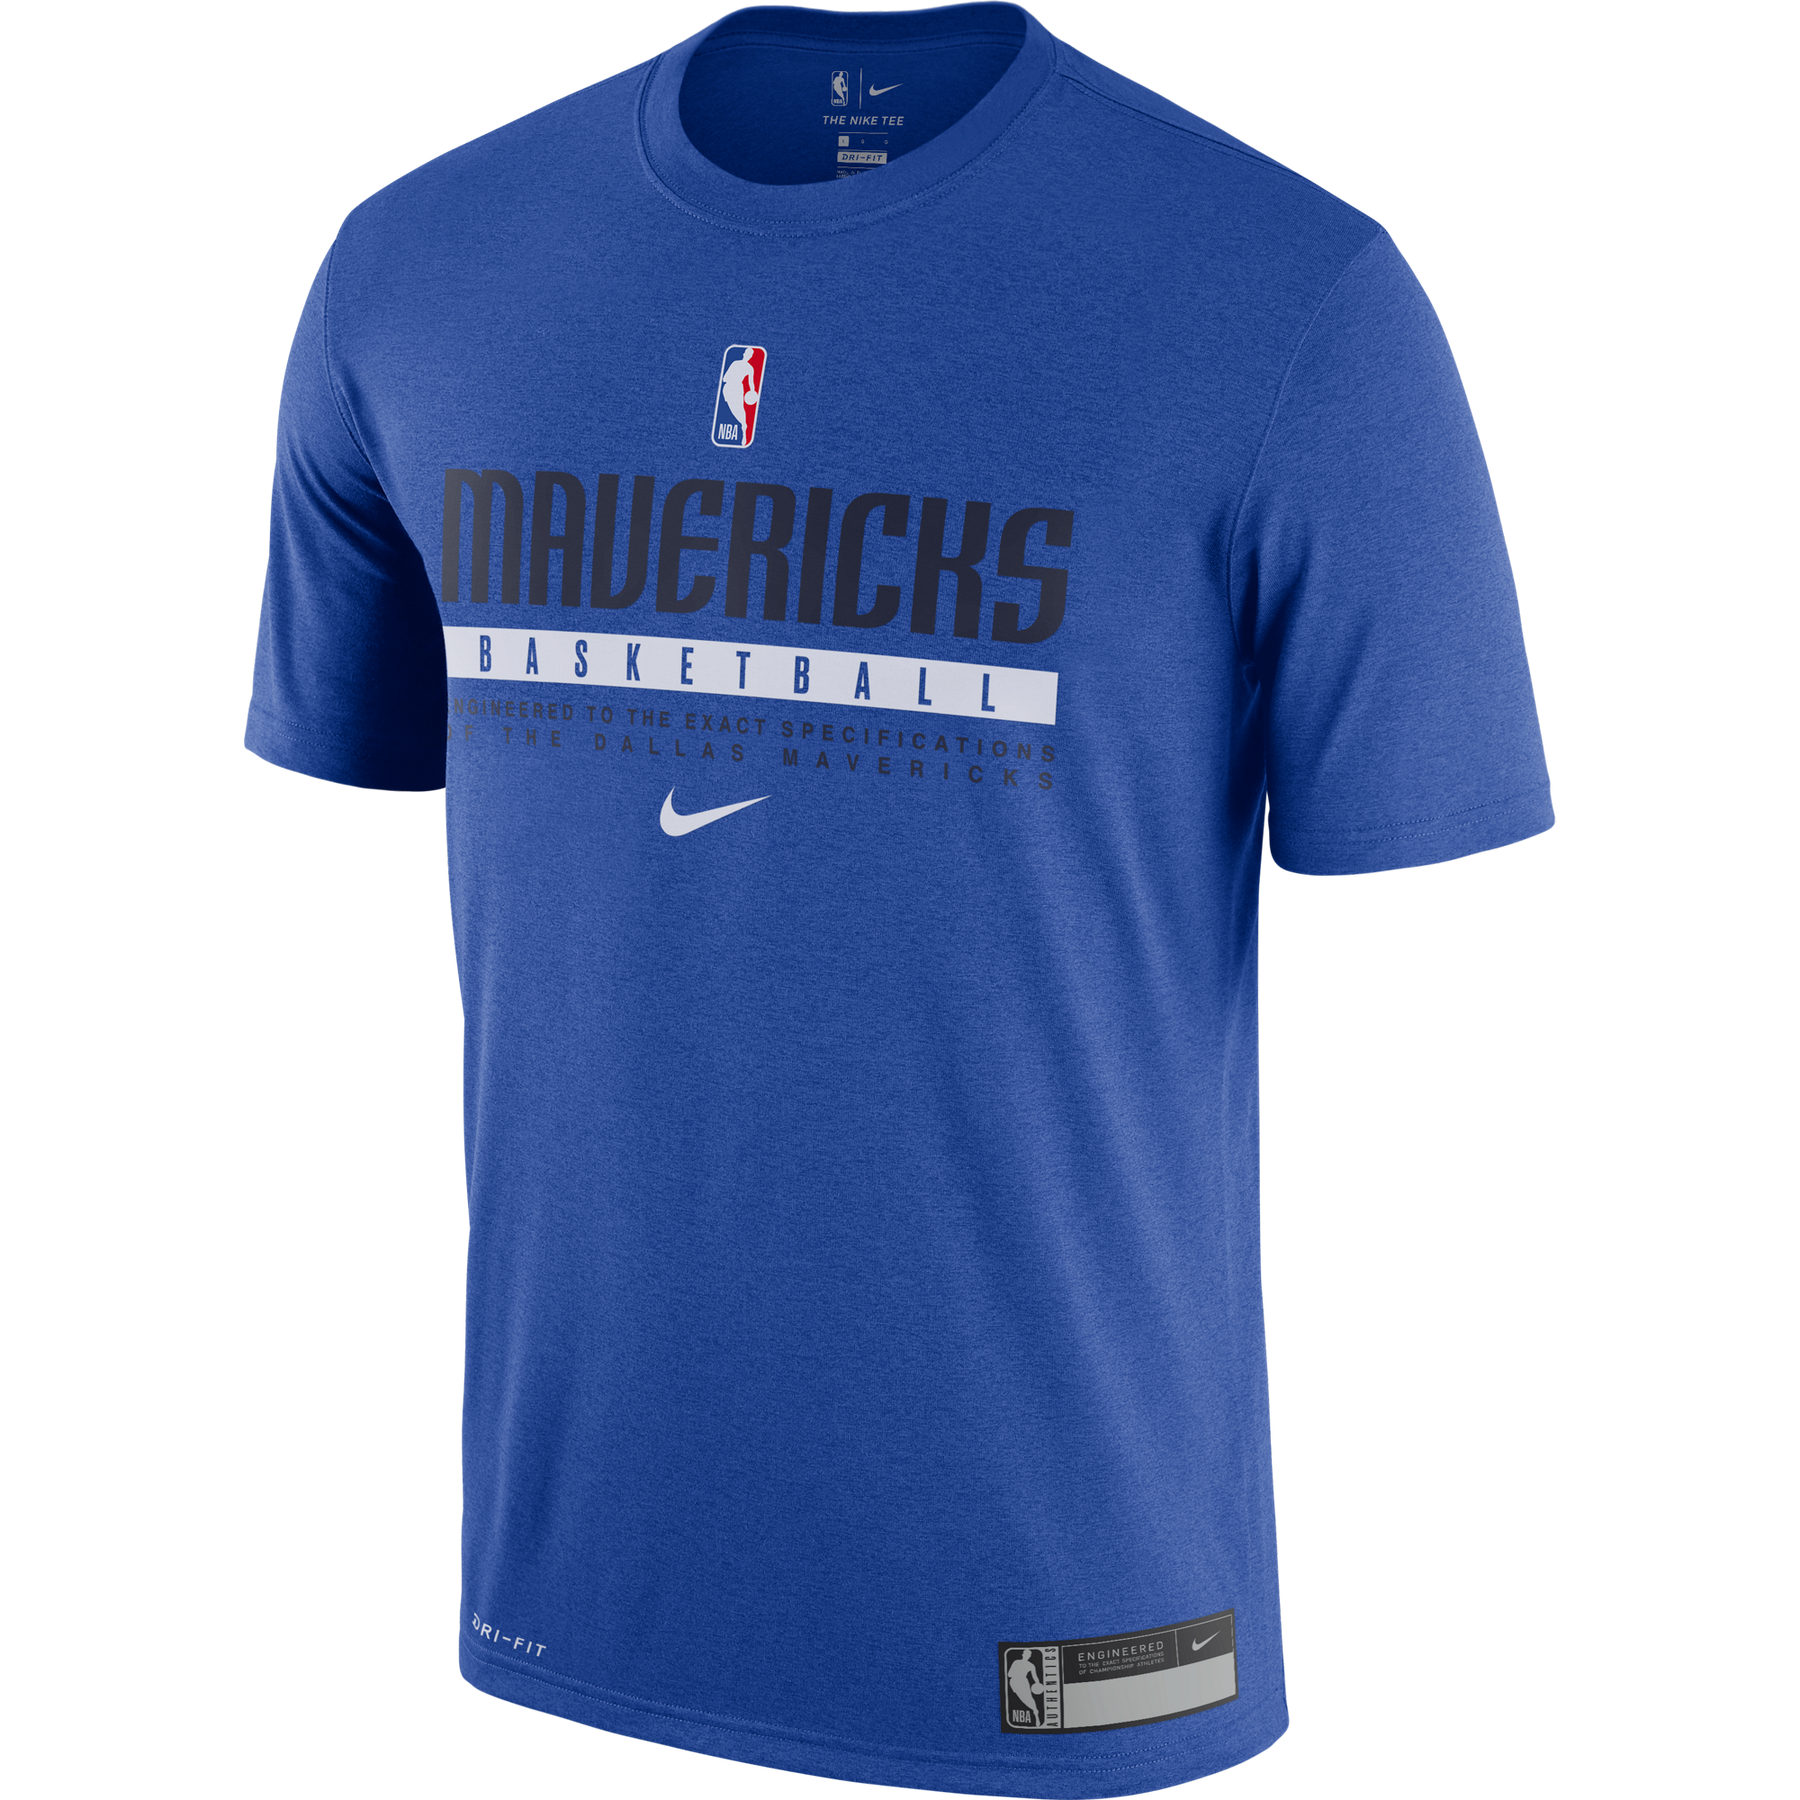 Nba Practice Jersey for sale